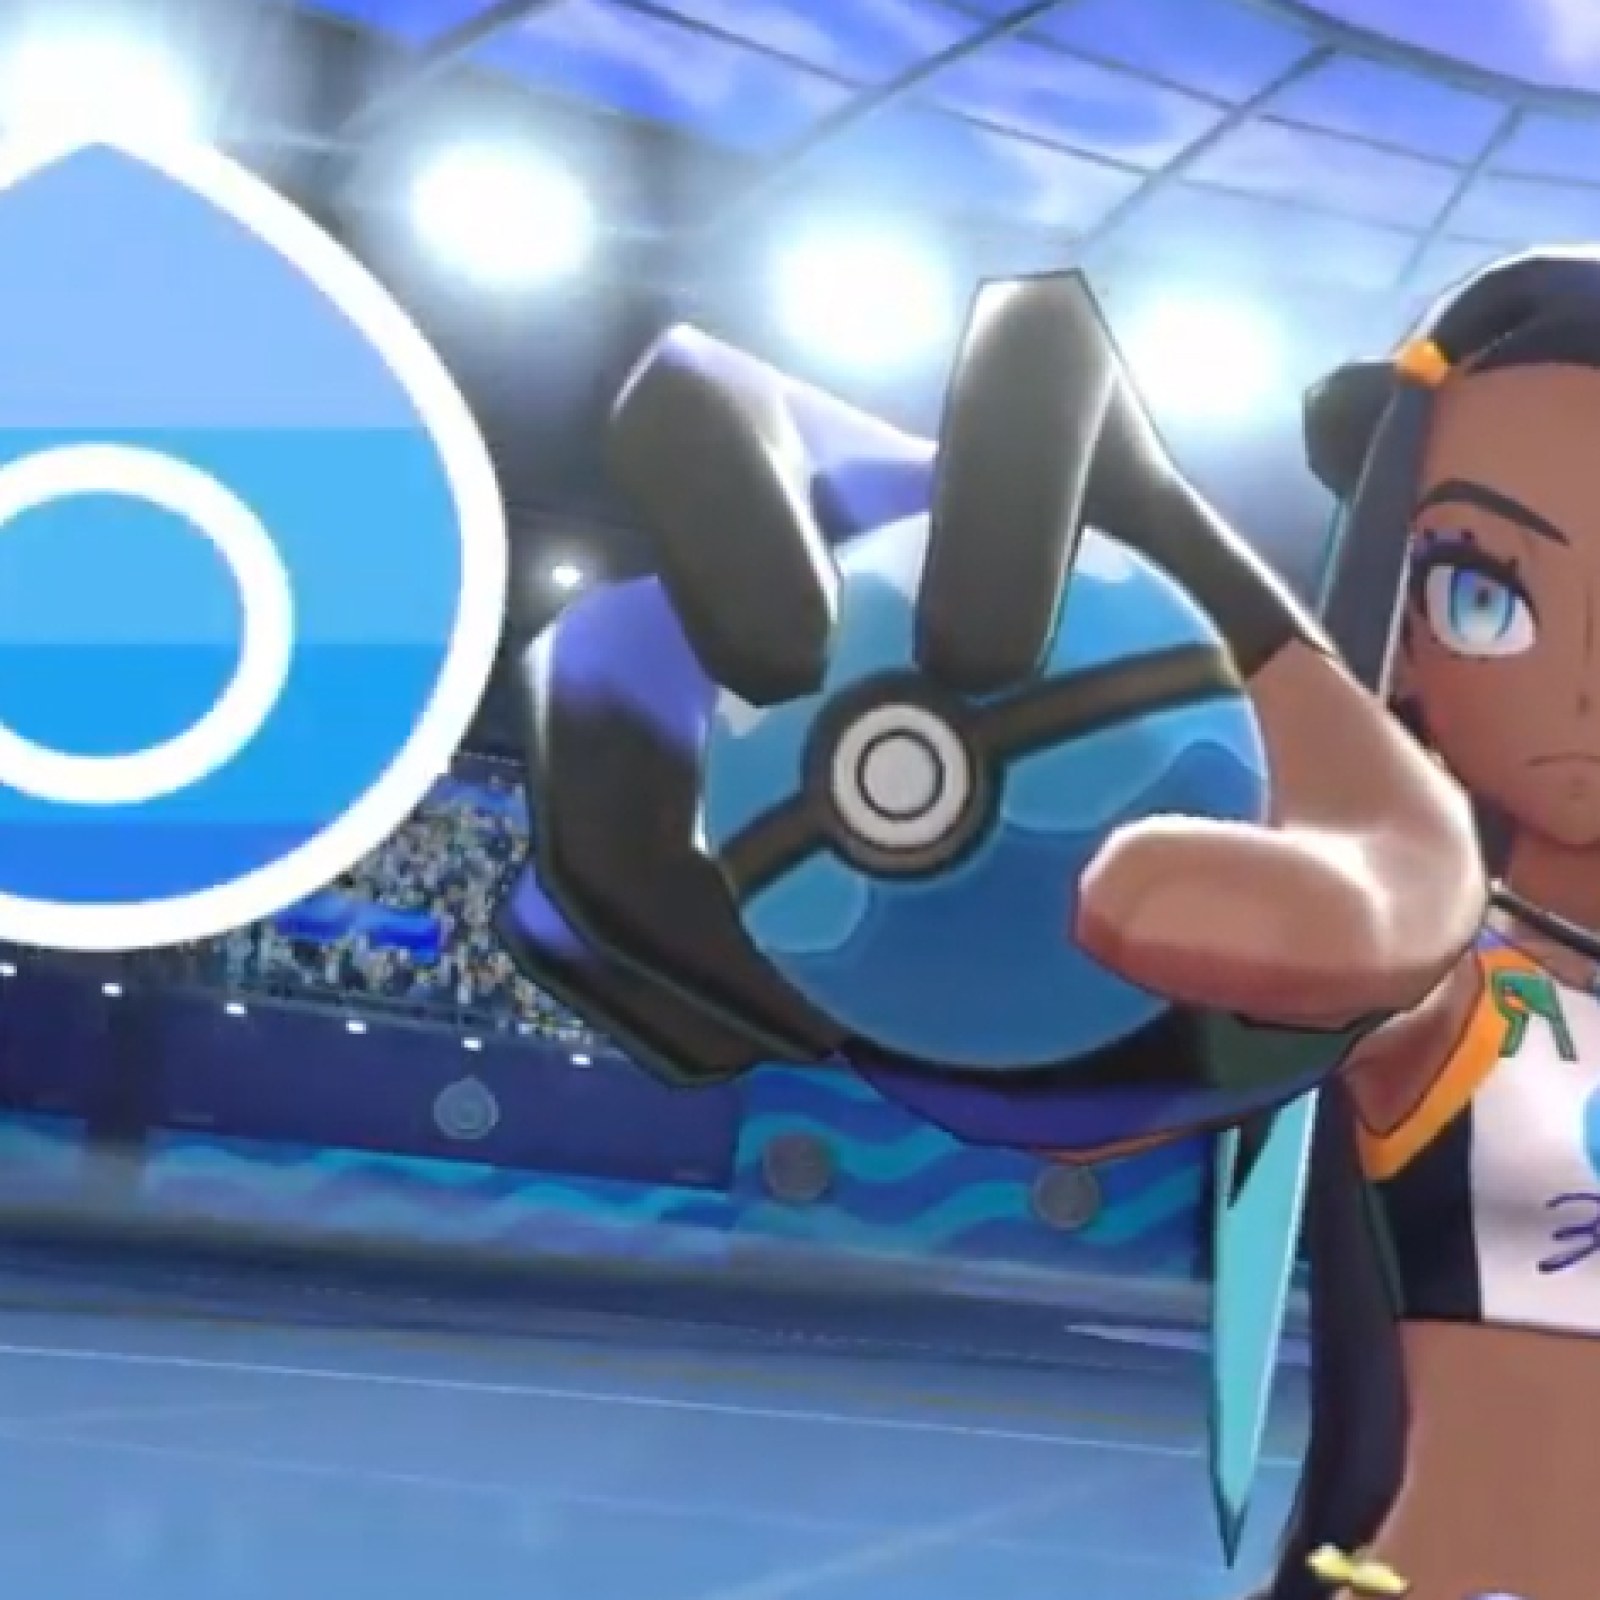 New Pokemon Sword And Shield Gym Leader And Pokeball Plus Details Revealed At 19